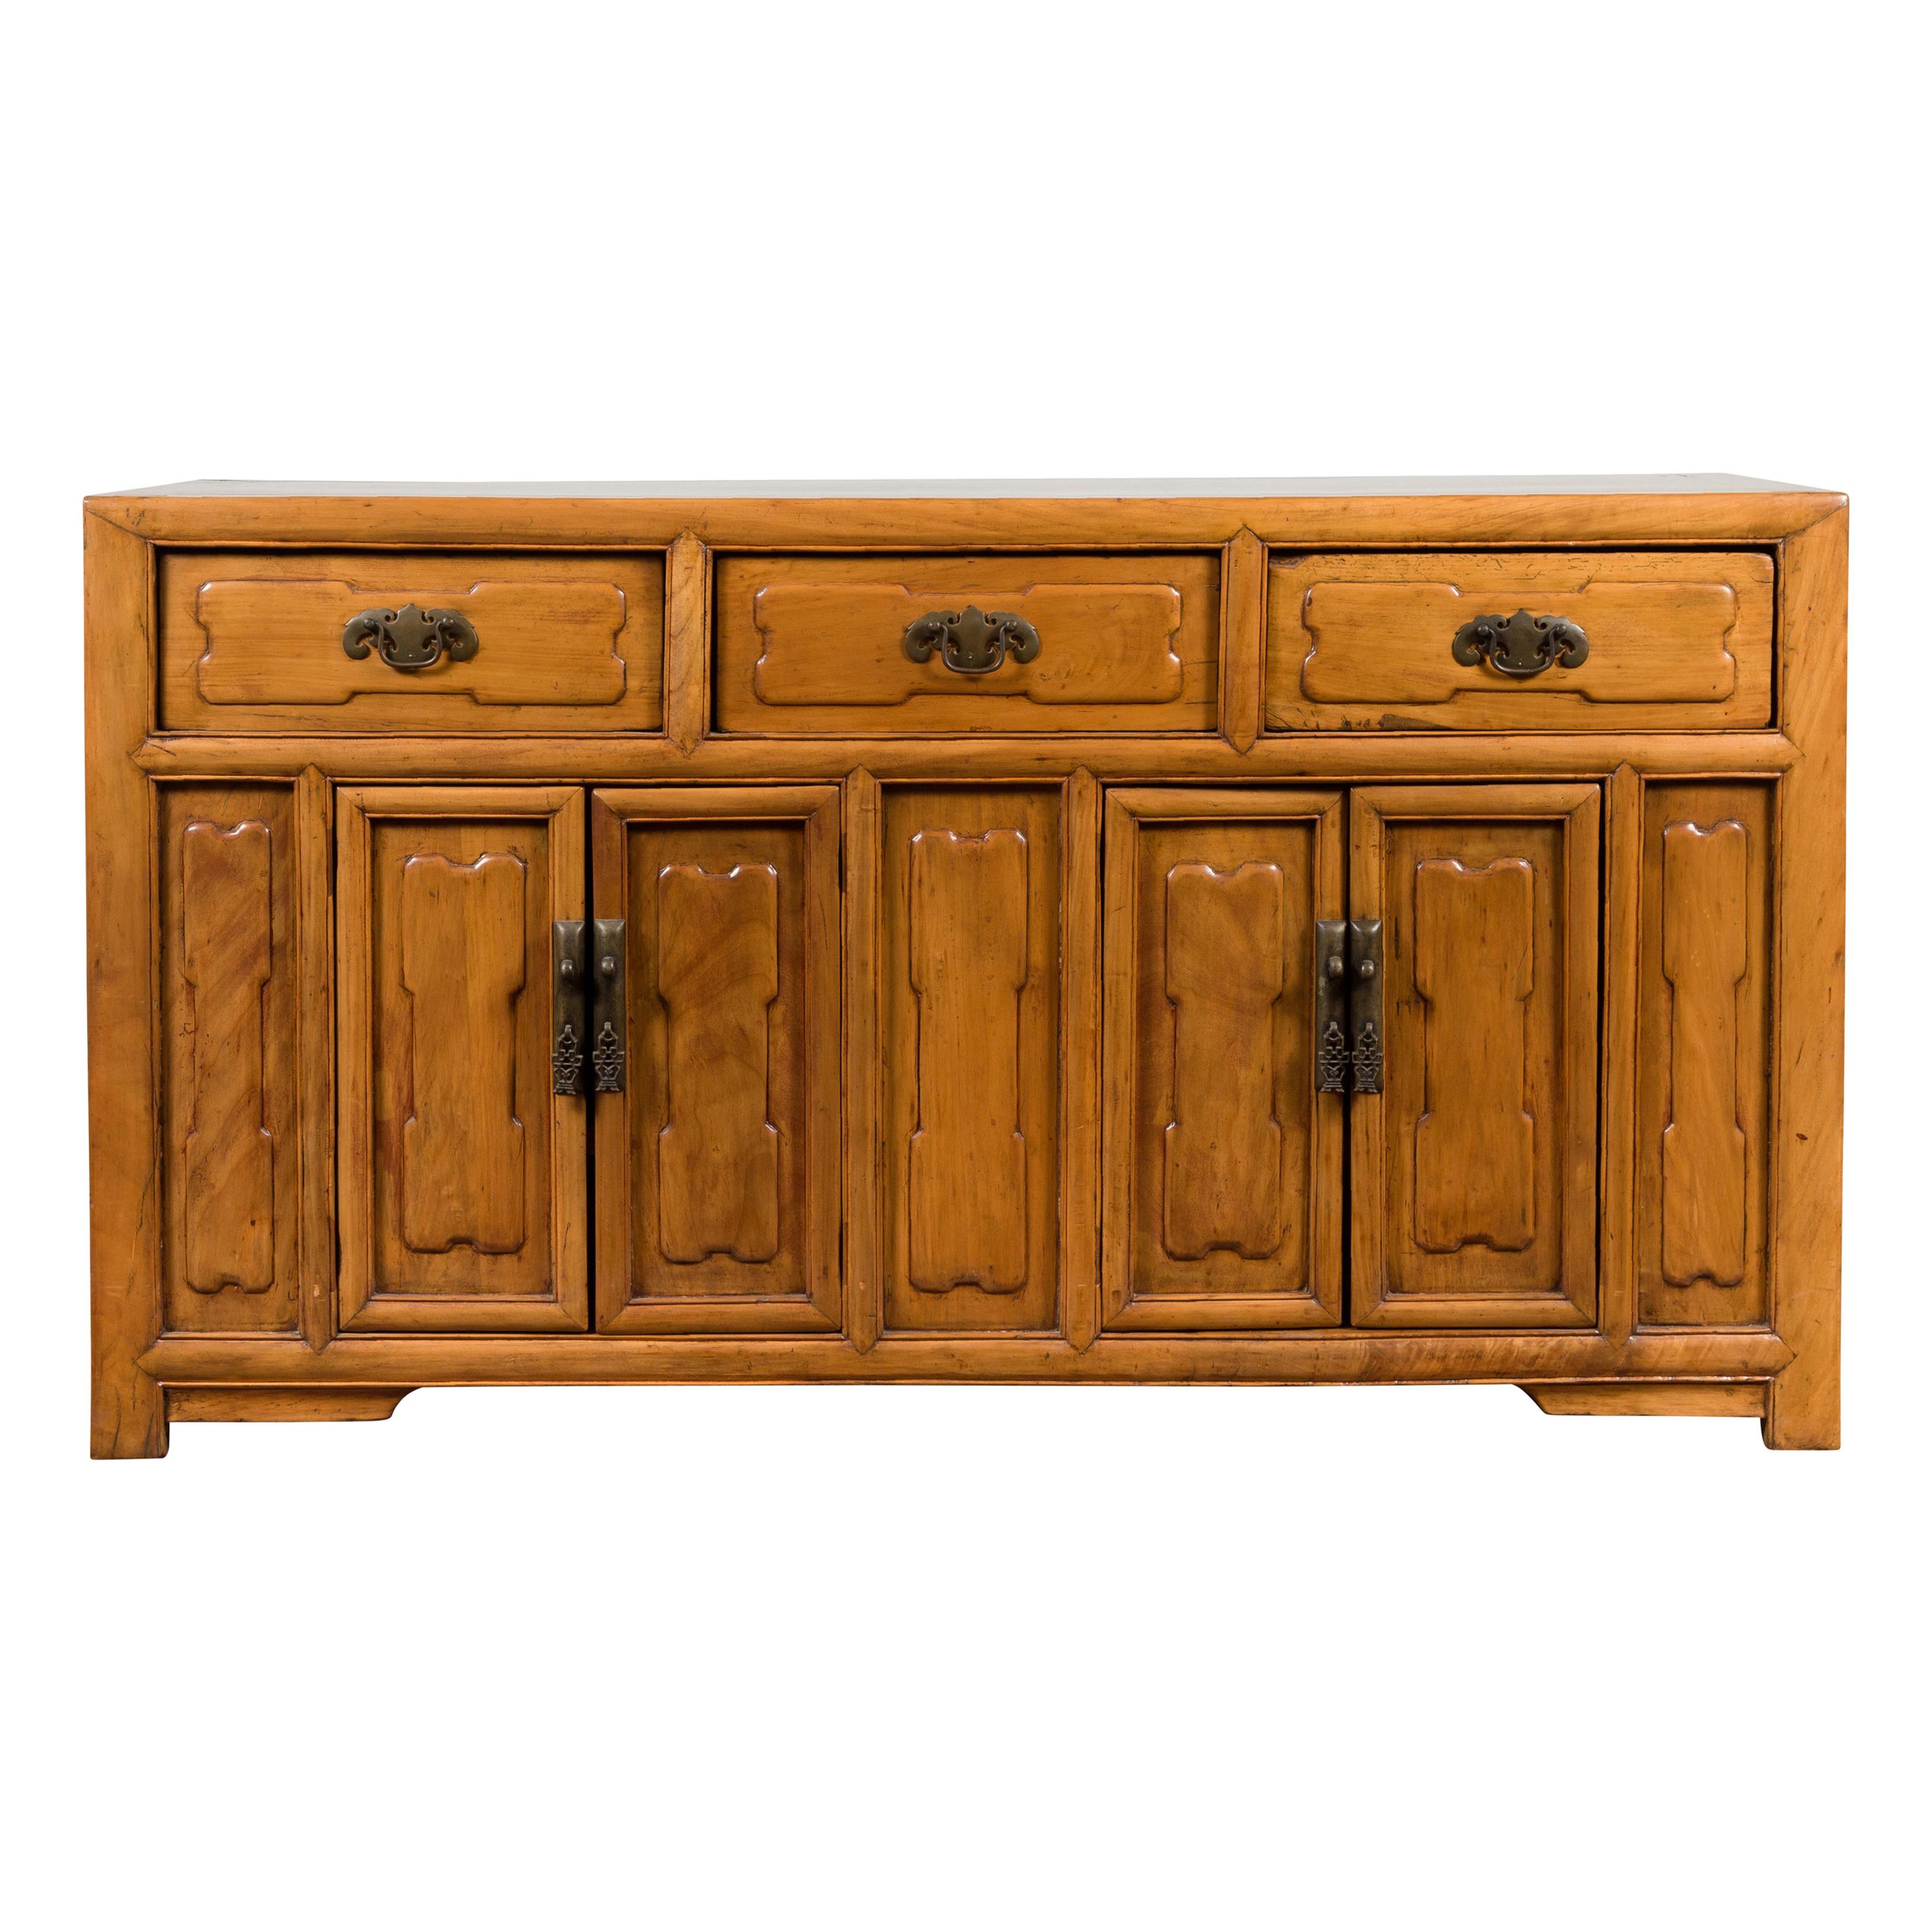 Chinese Early 20th Century Elm Sideboard with Raised Panels, Doors and Drawers